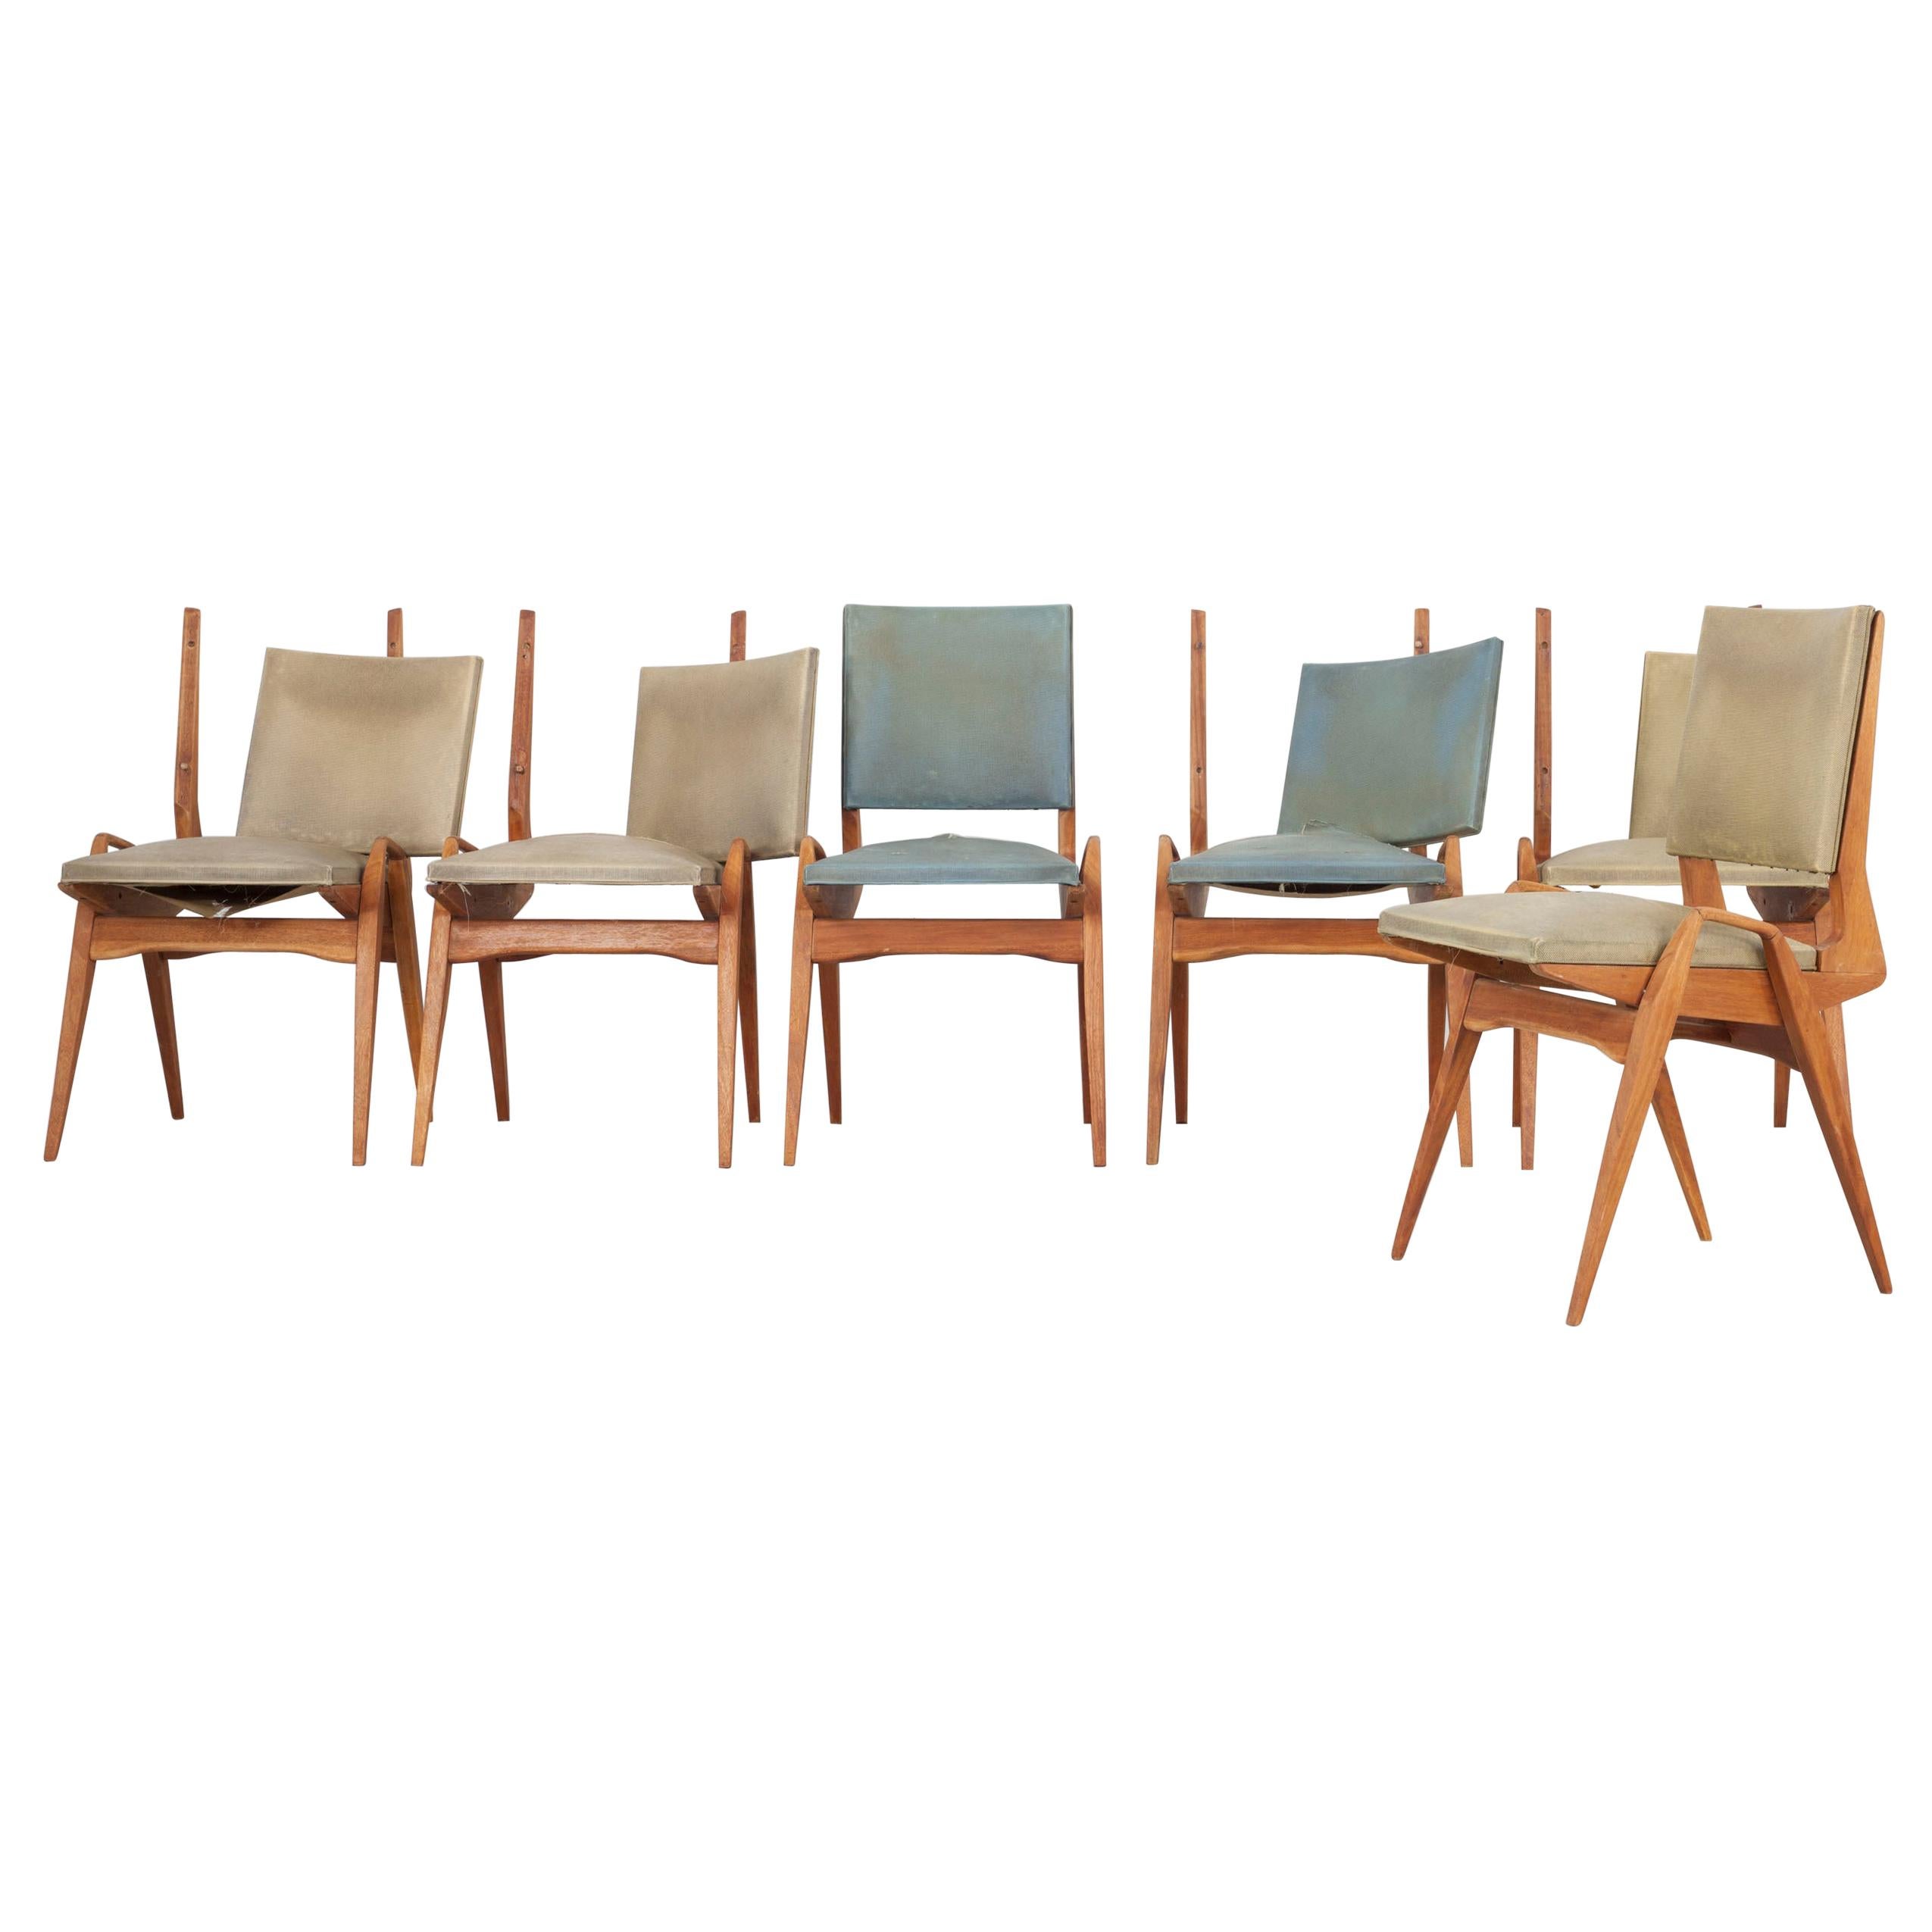 Set of 6 Maurice Pré Dining Room Chairs, France, 1950s